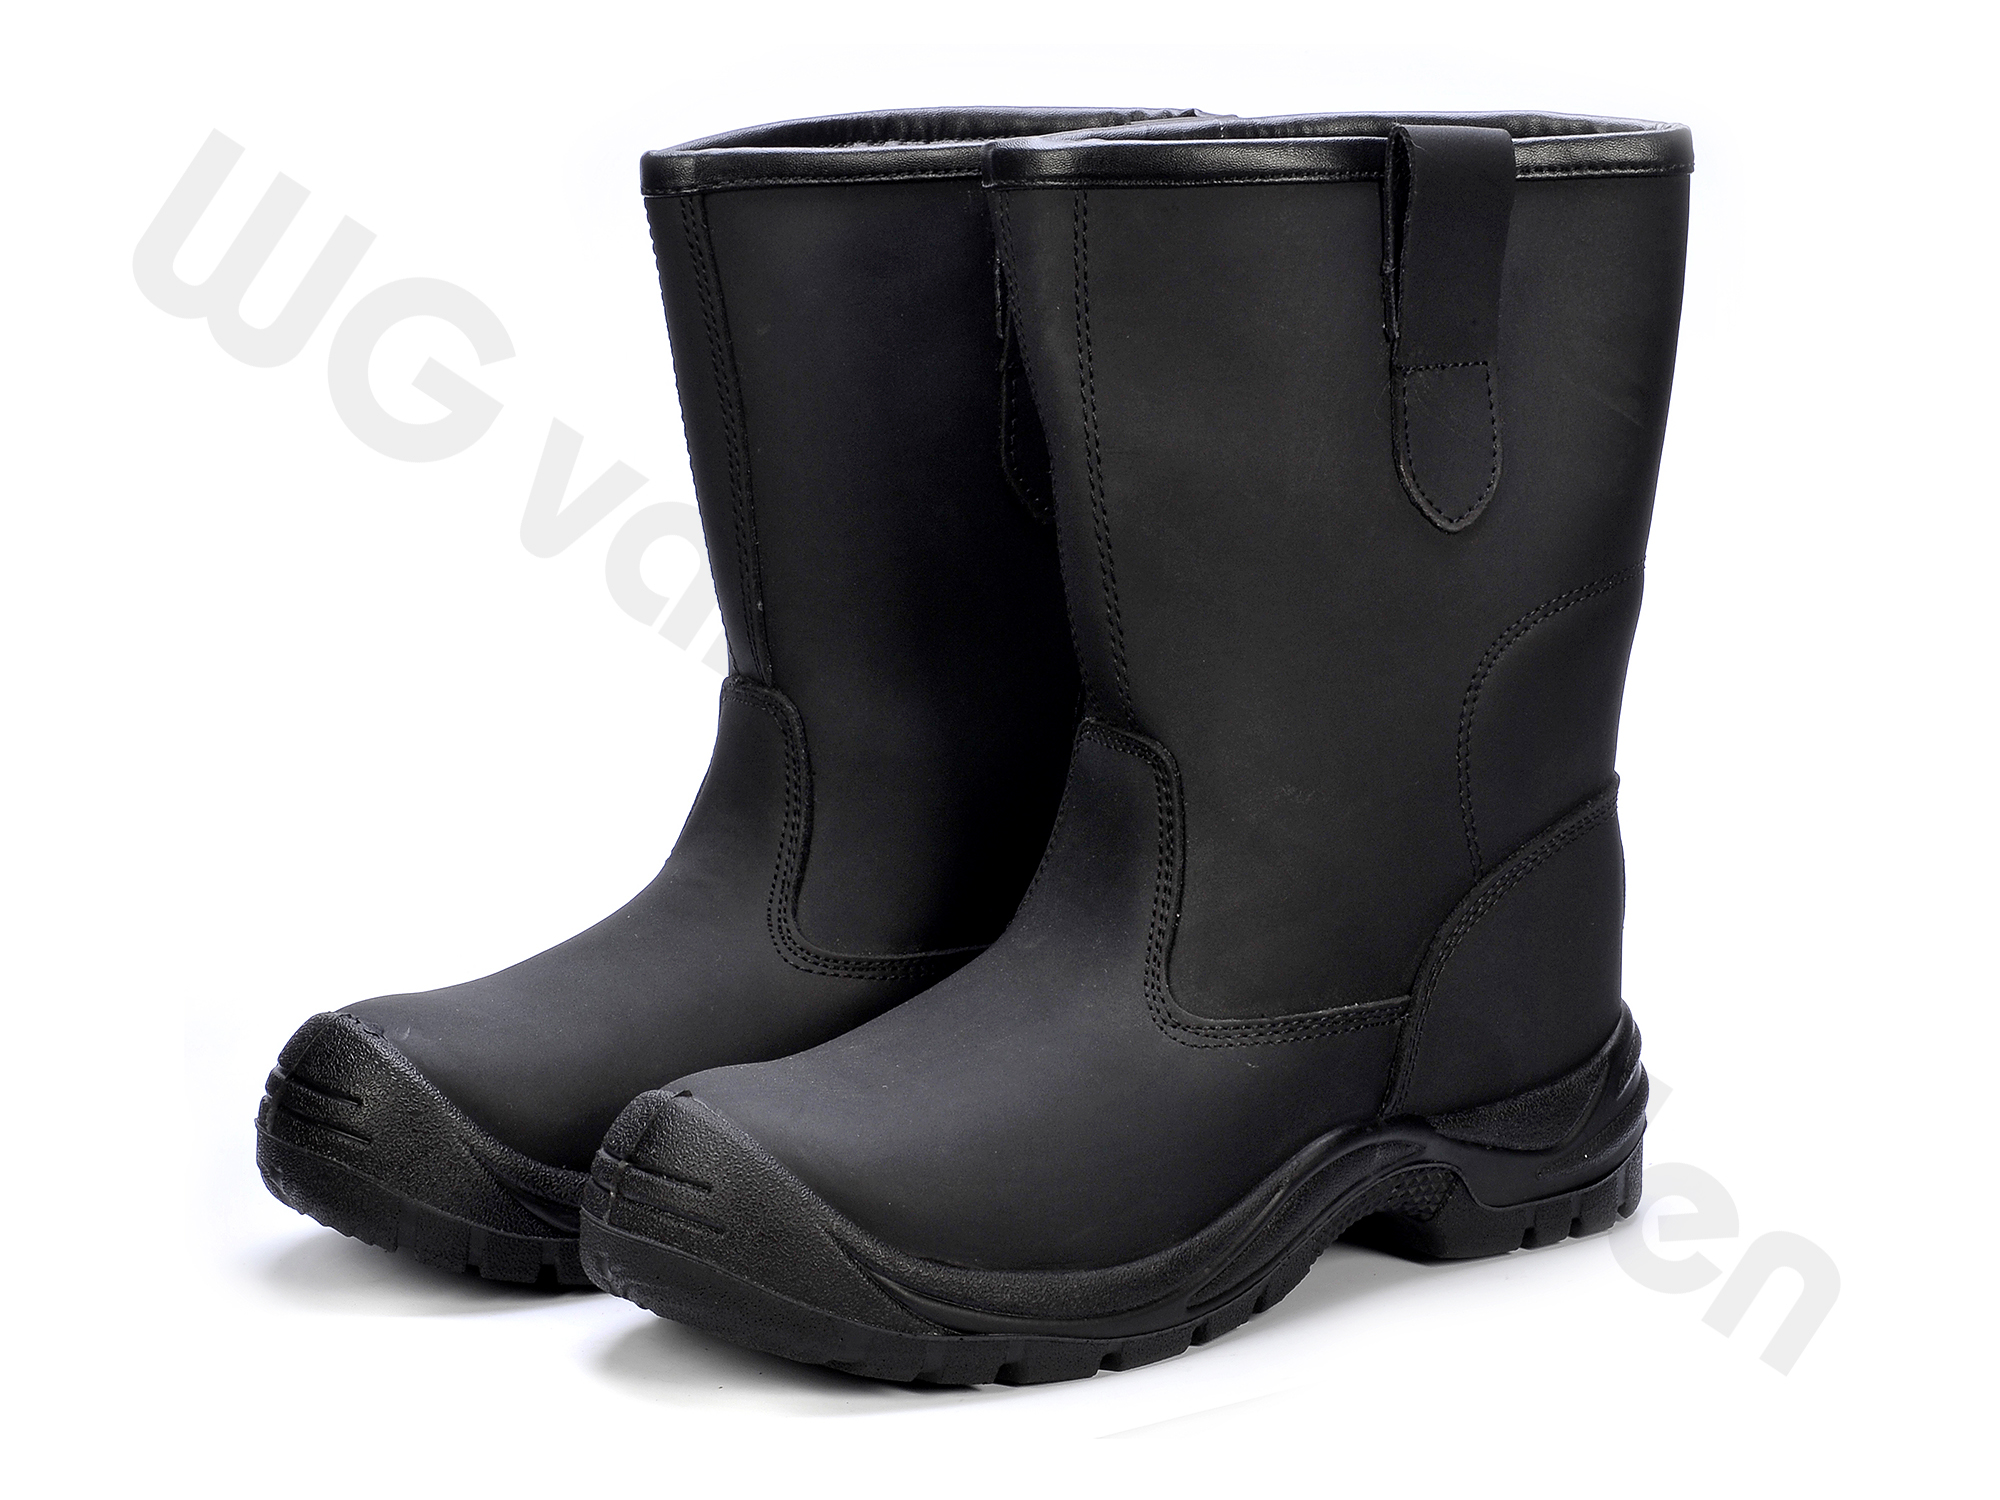 880358 BOOTS SAFETY S3 LEATHER W/STEEL TOE AND LINING 47/29.5CM